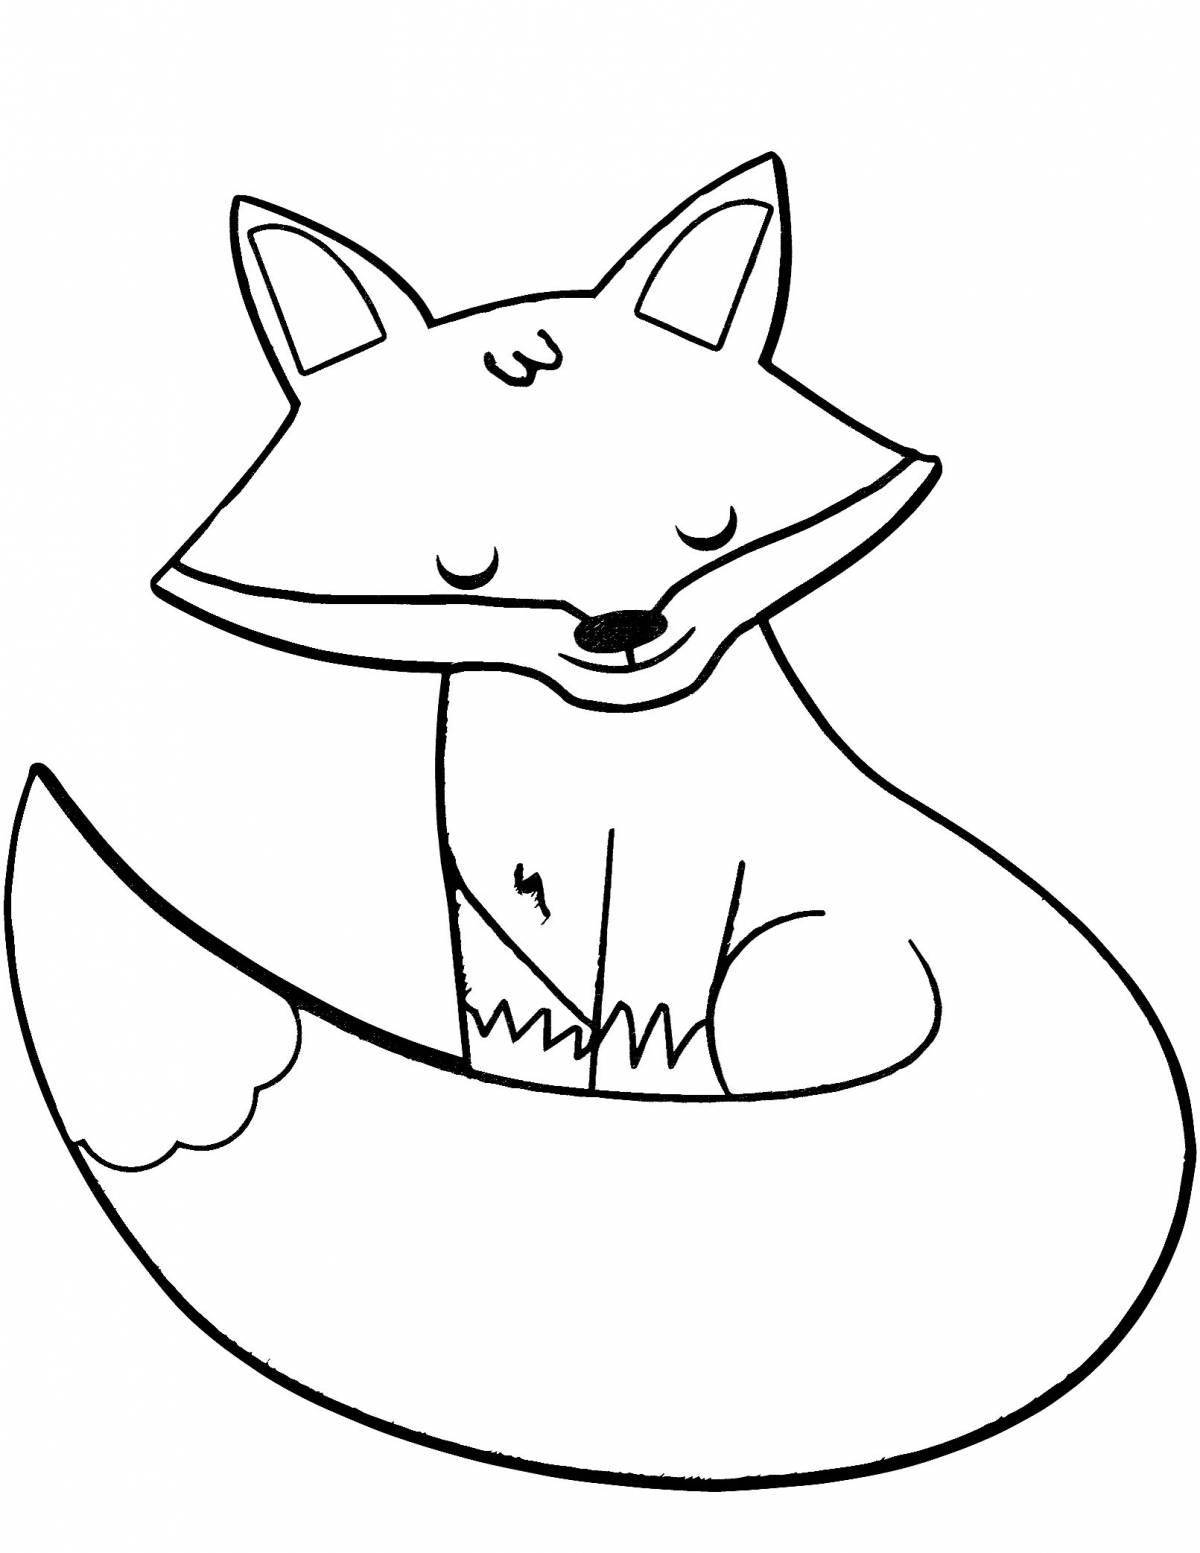 Serene coloring page fox figure